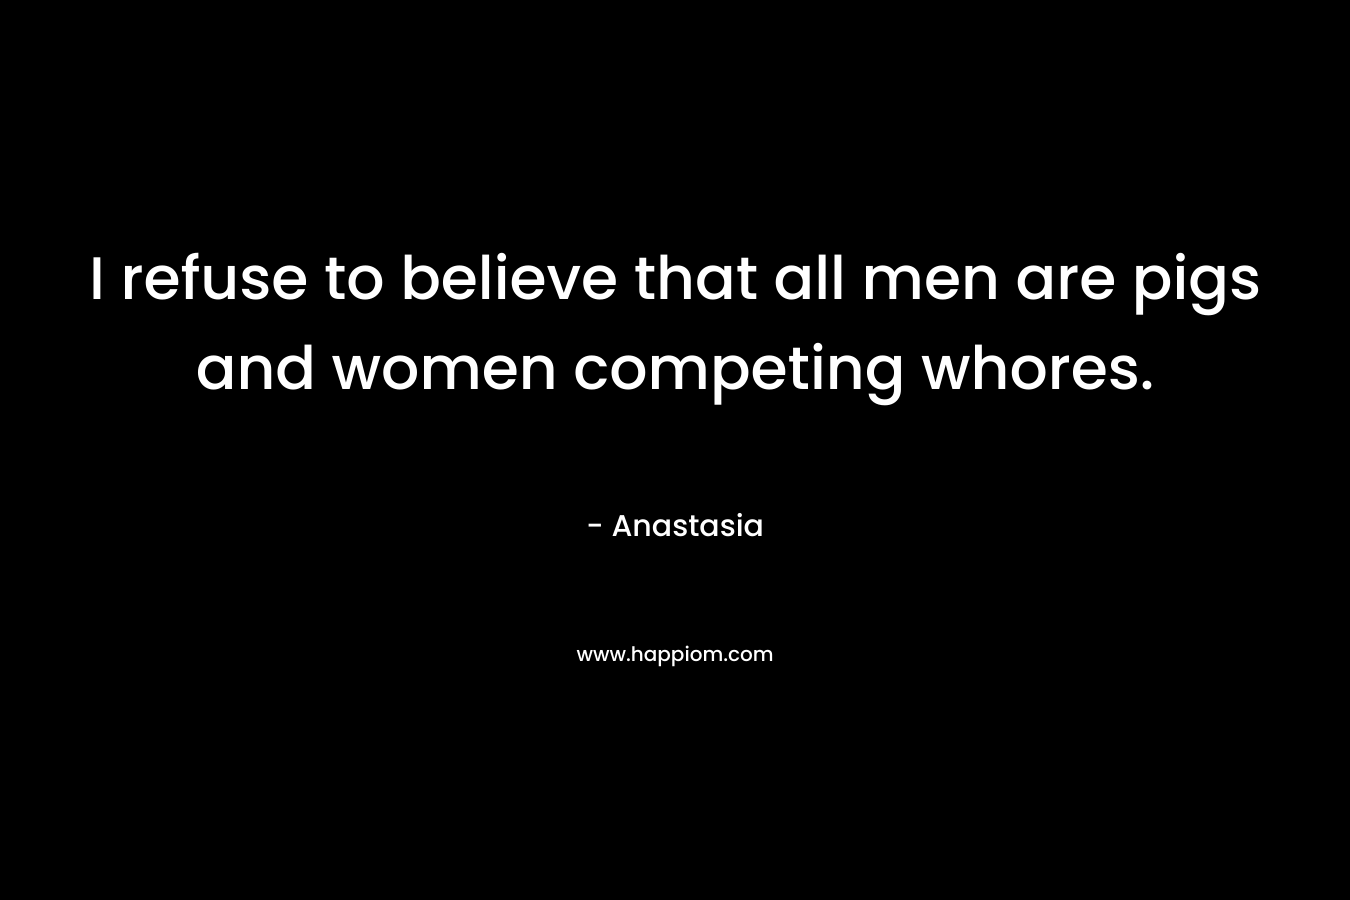 I refuse to believe that all men are pigs and women competing whores. – Anastasia